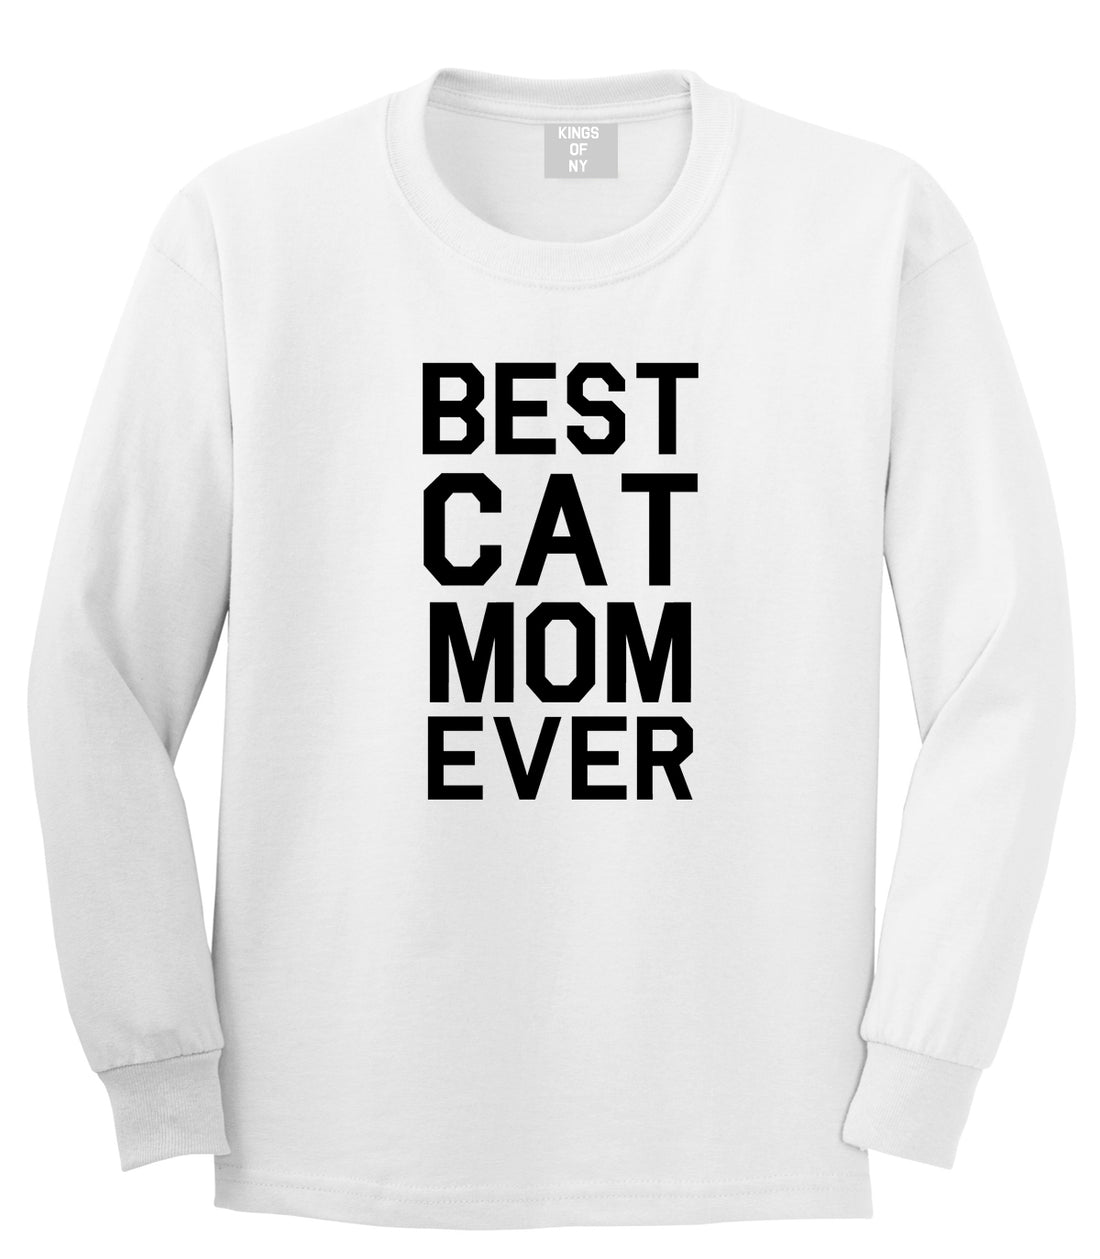 Best Cat Mom Ever Mens White Long Sleeve T-Shirt by Kings Of NY